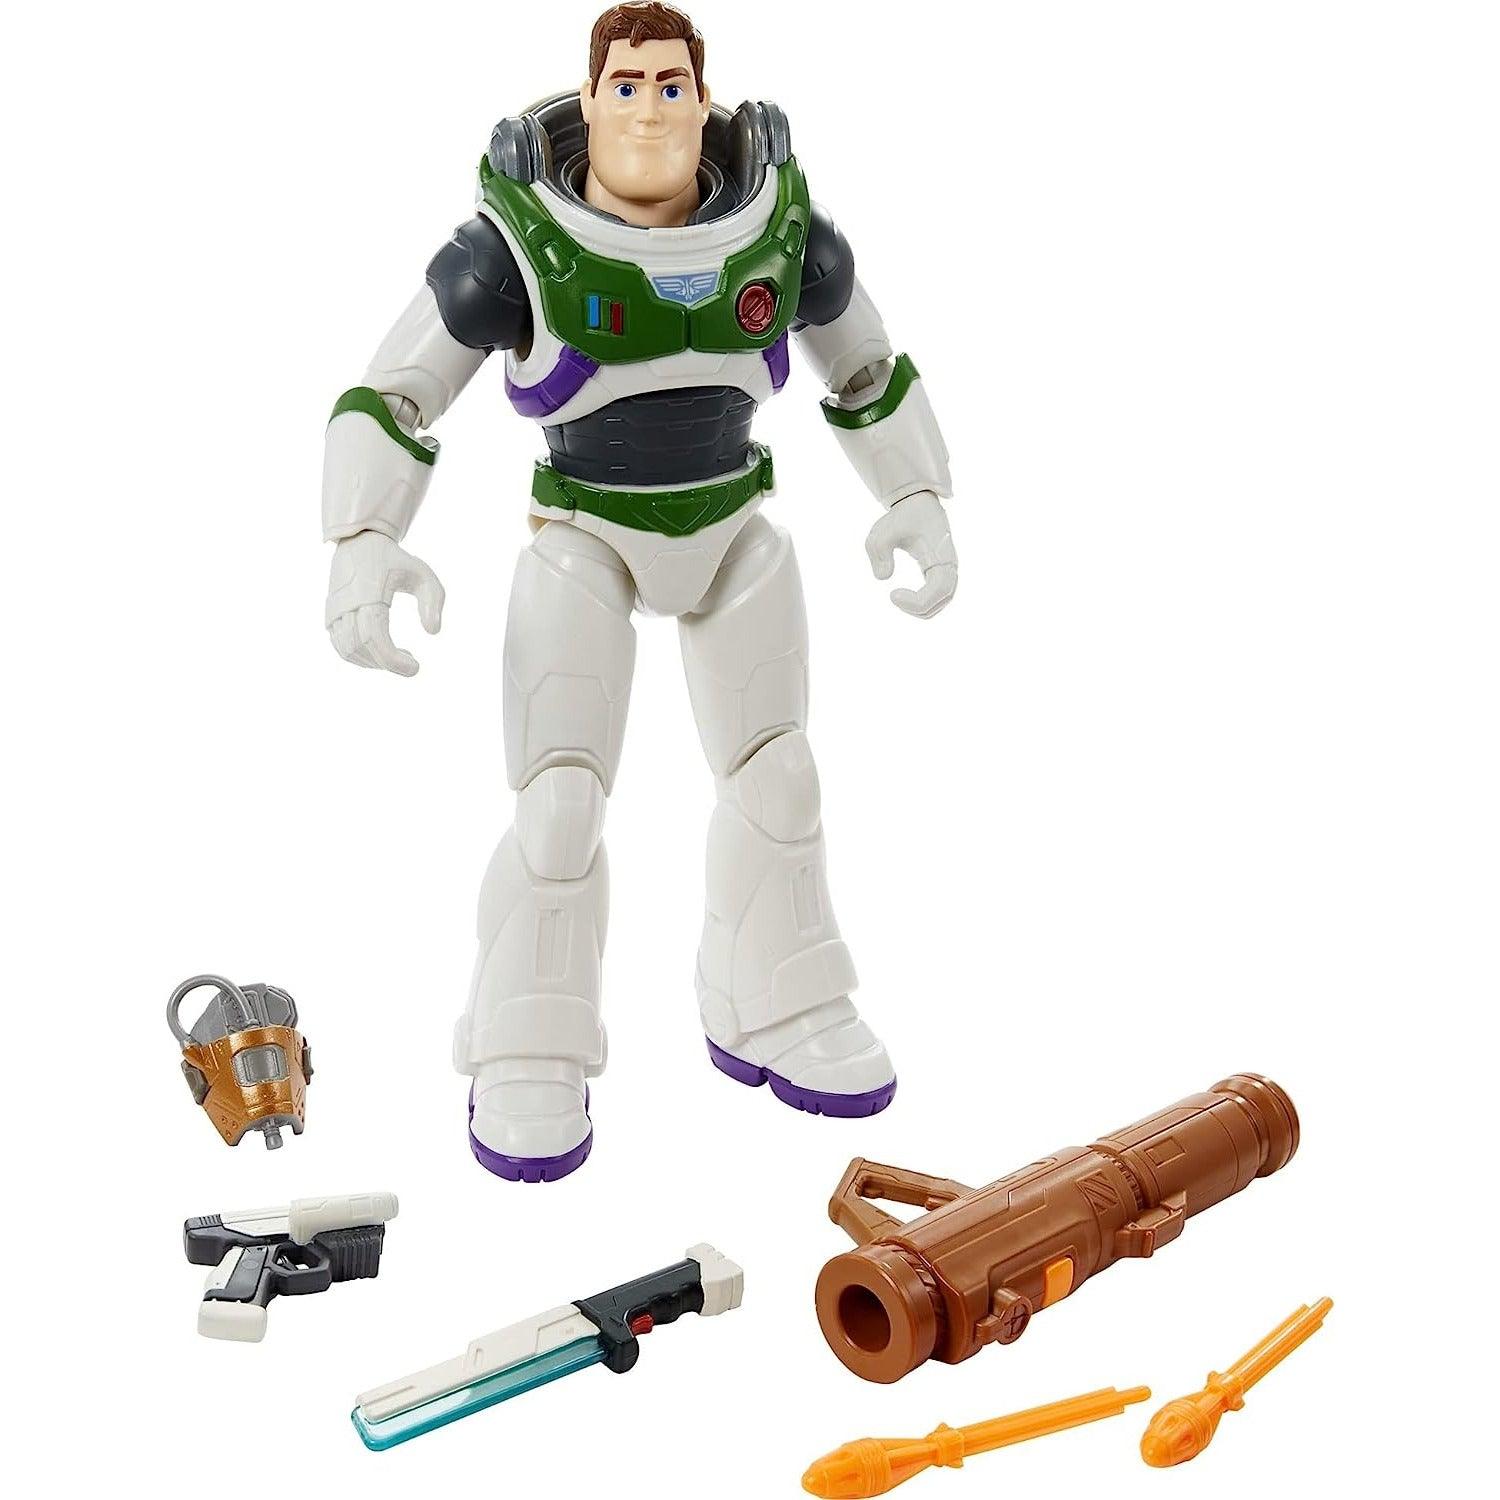 Mattel Lightyear Toys 12-in Action Figure with Accessories, Buzz Lightyear with 4 Gear Up Accessories - BumbleToys - 18+, 5-7 Years, Action Figures, Boys, Lightyear, Pre-Order, Toy Story